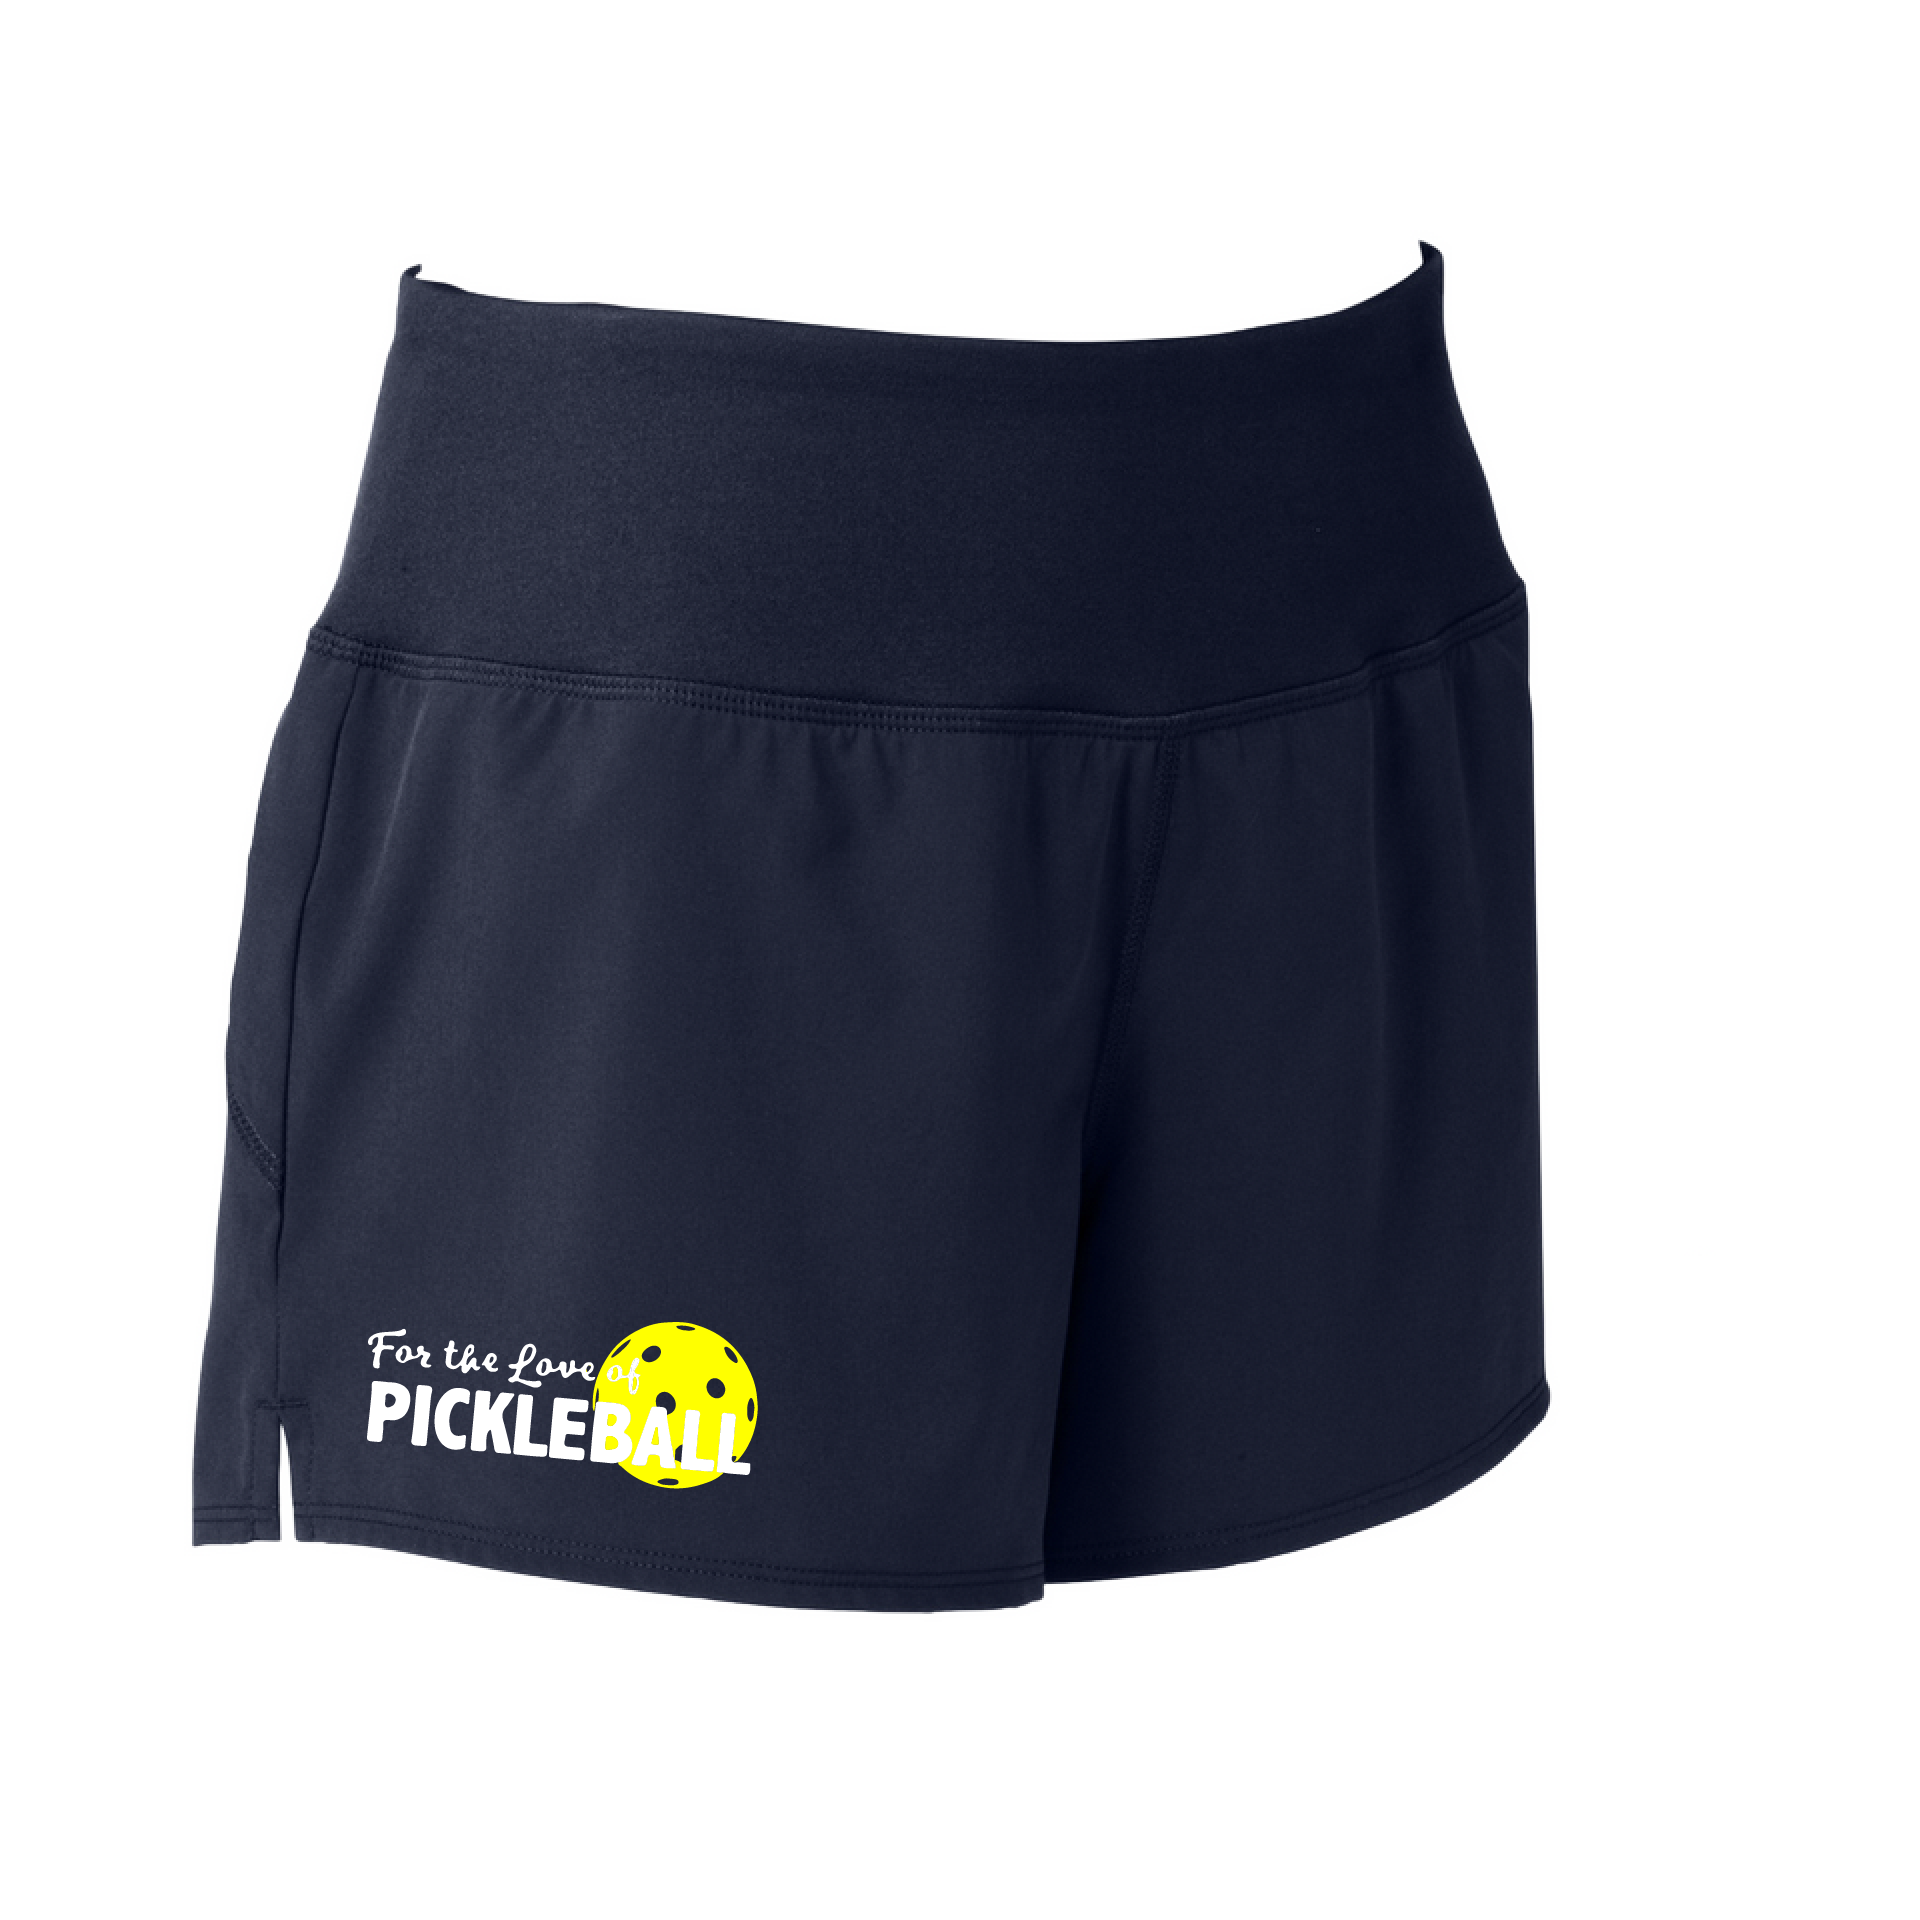 Shorts Pickleball Designs: For the Love of Pickleball  Sport Tek women’s repeat shorts come with built-in cell phone pocket on the exterior of the waistband. You can also feel secure knowing that no matter how strenuous the exercise, the shorts will remain in place (it won’t ride up!). These shorts are extremely versatile and trendy. Transition from the Pickleball court to running errands smoothly.